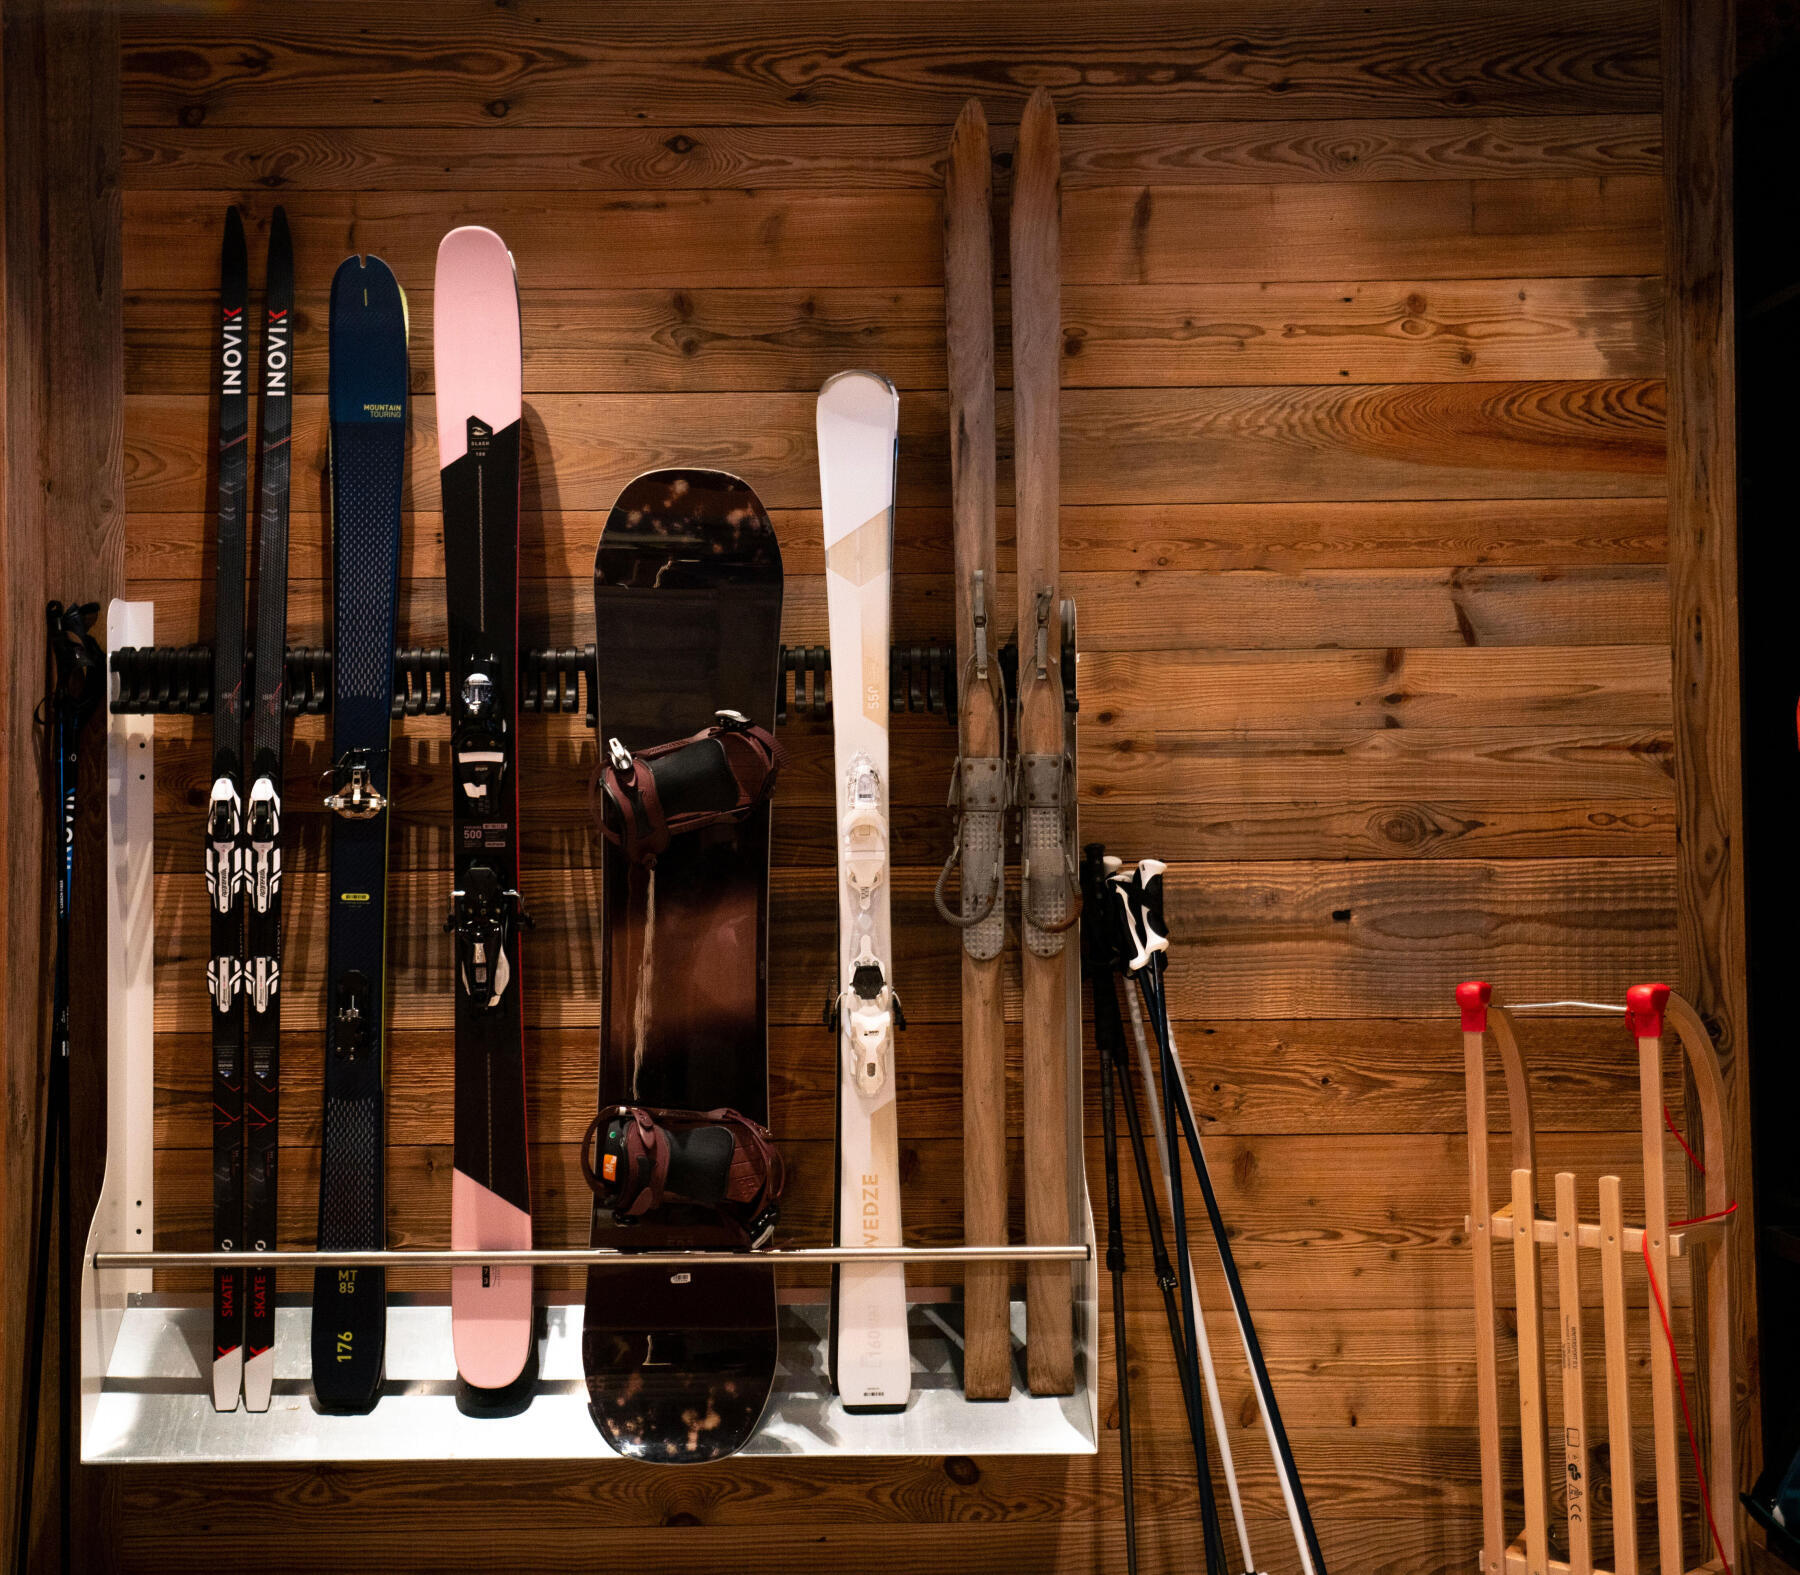 Looking after and repairing your skis